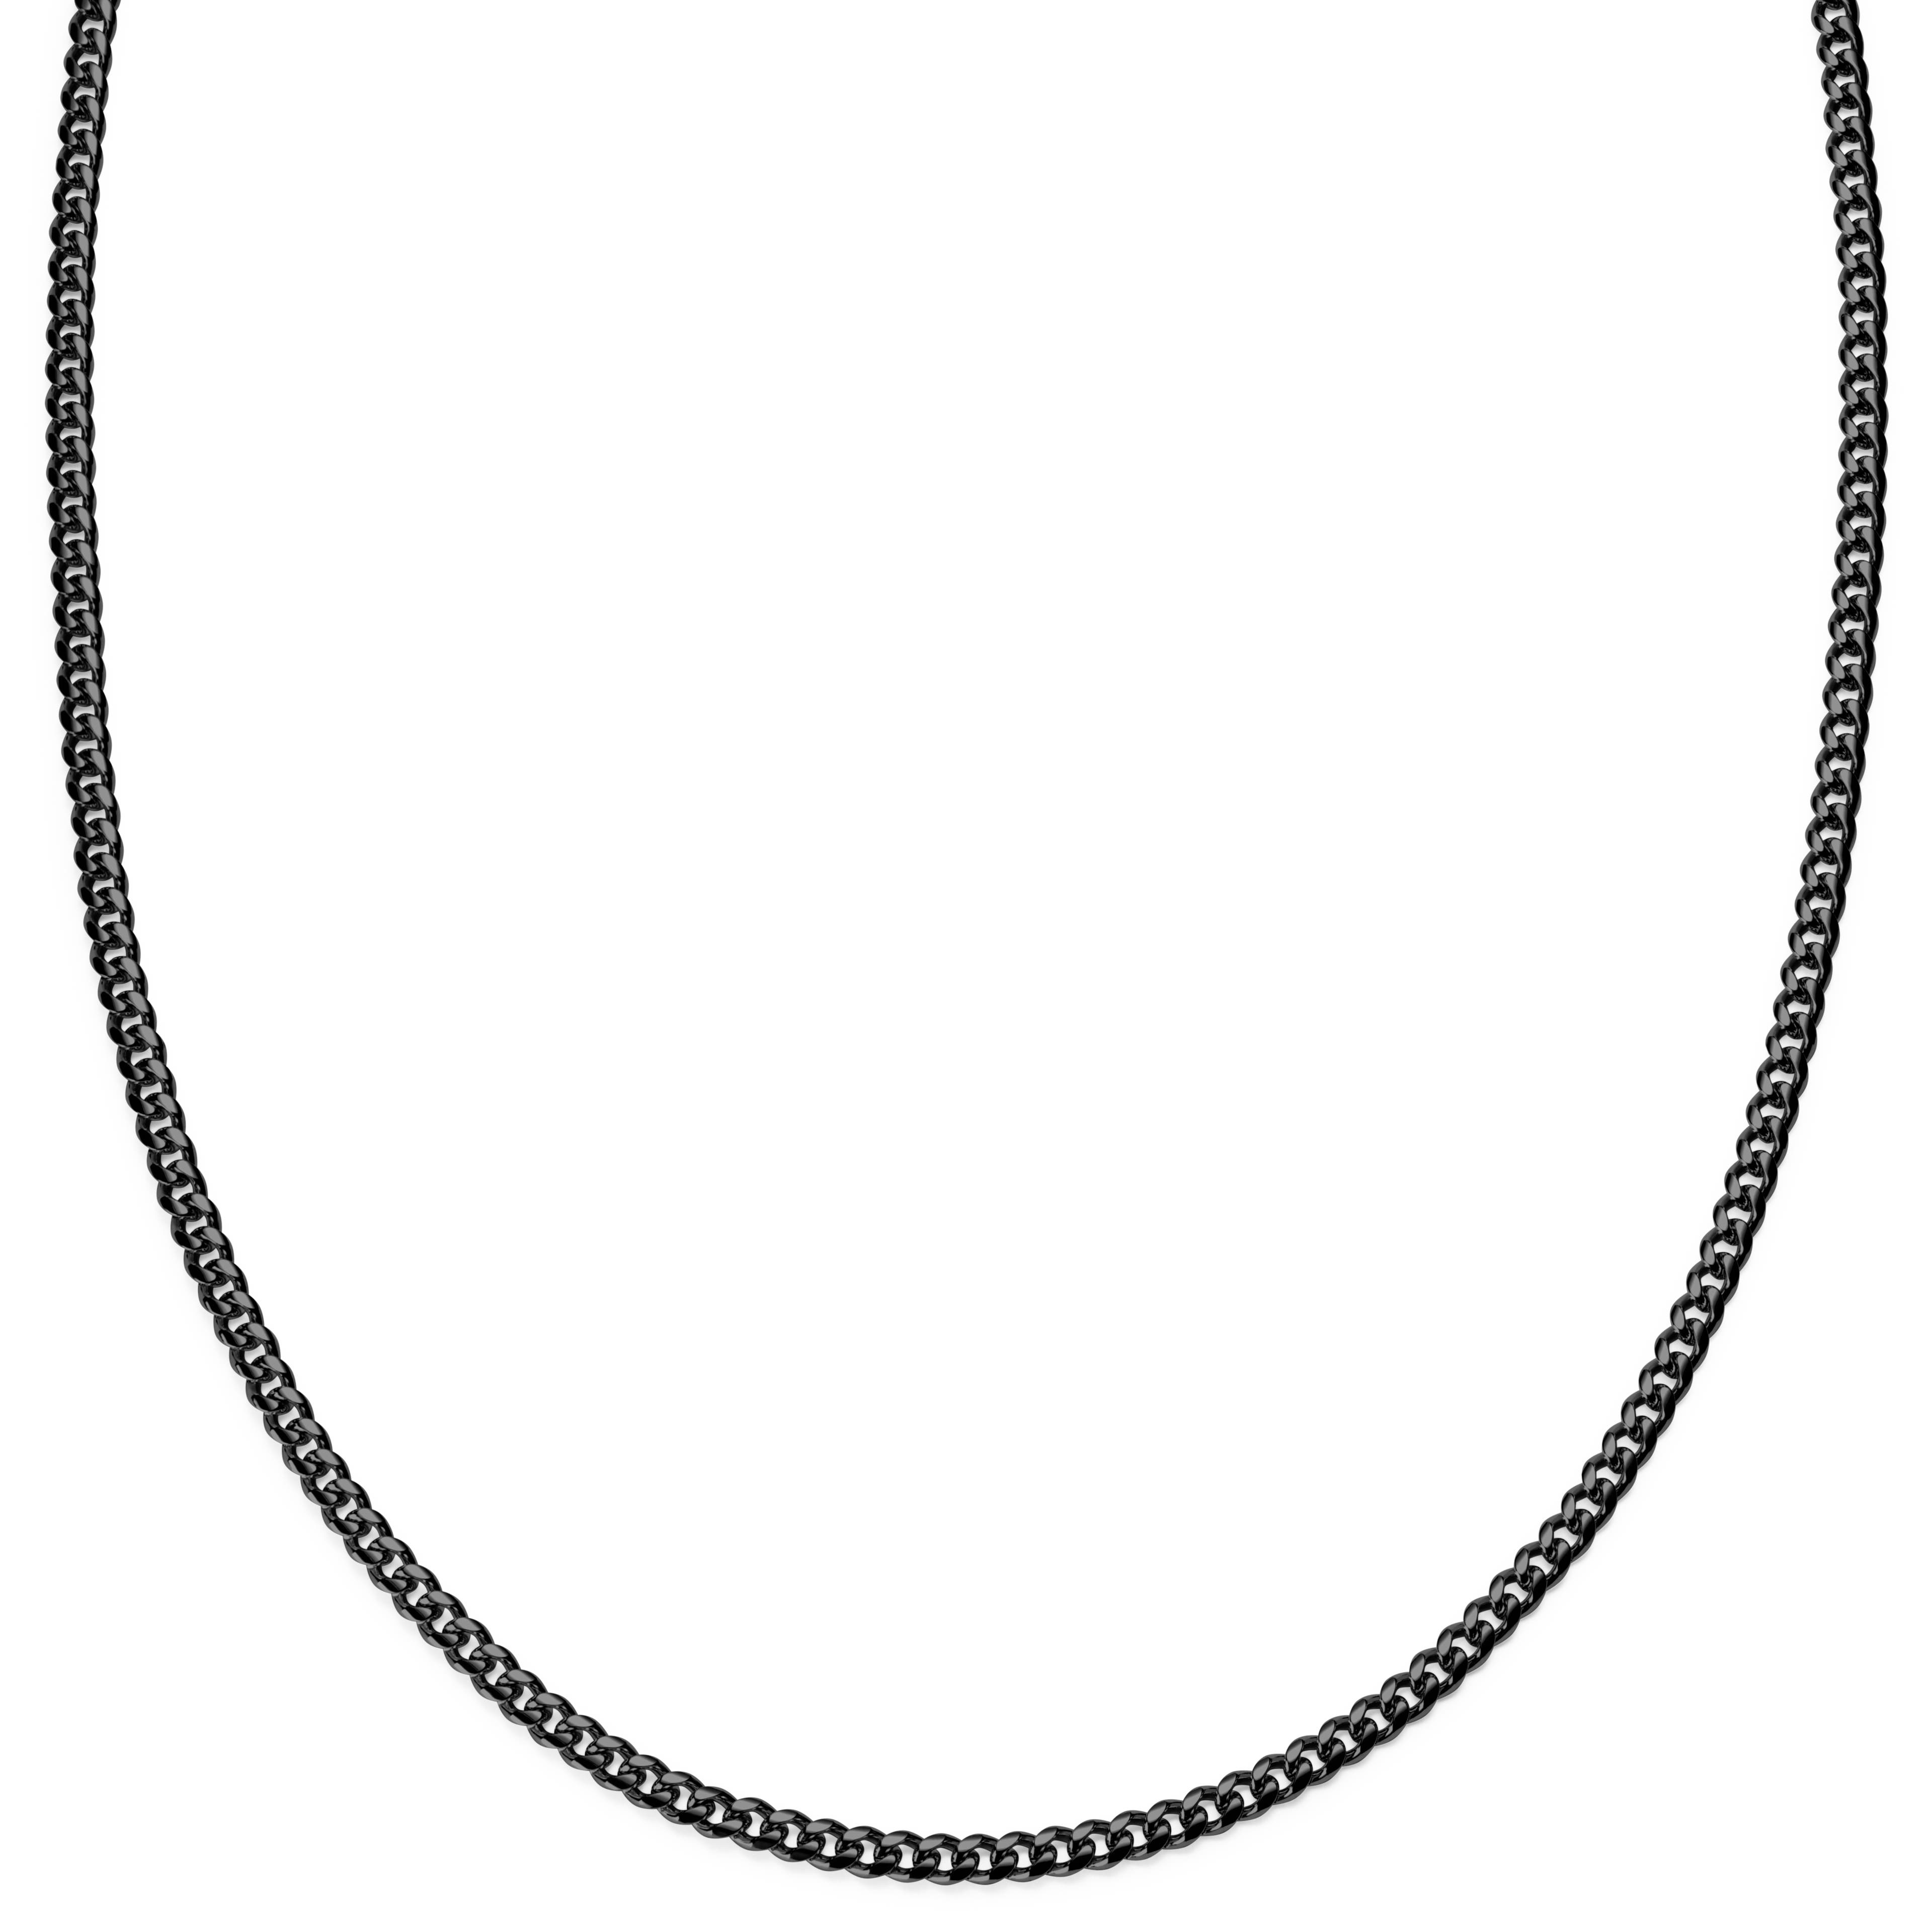 3 mm Black Chain Necklace